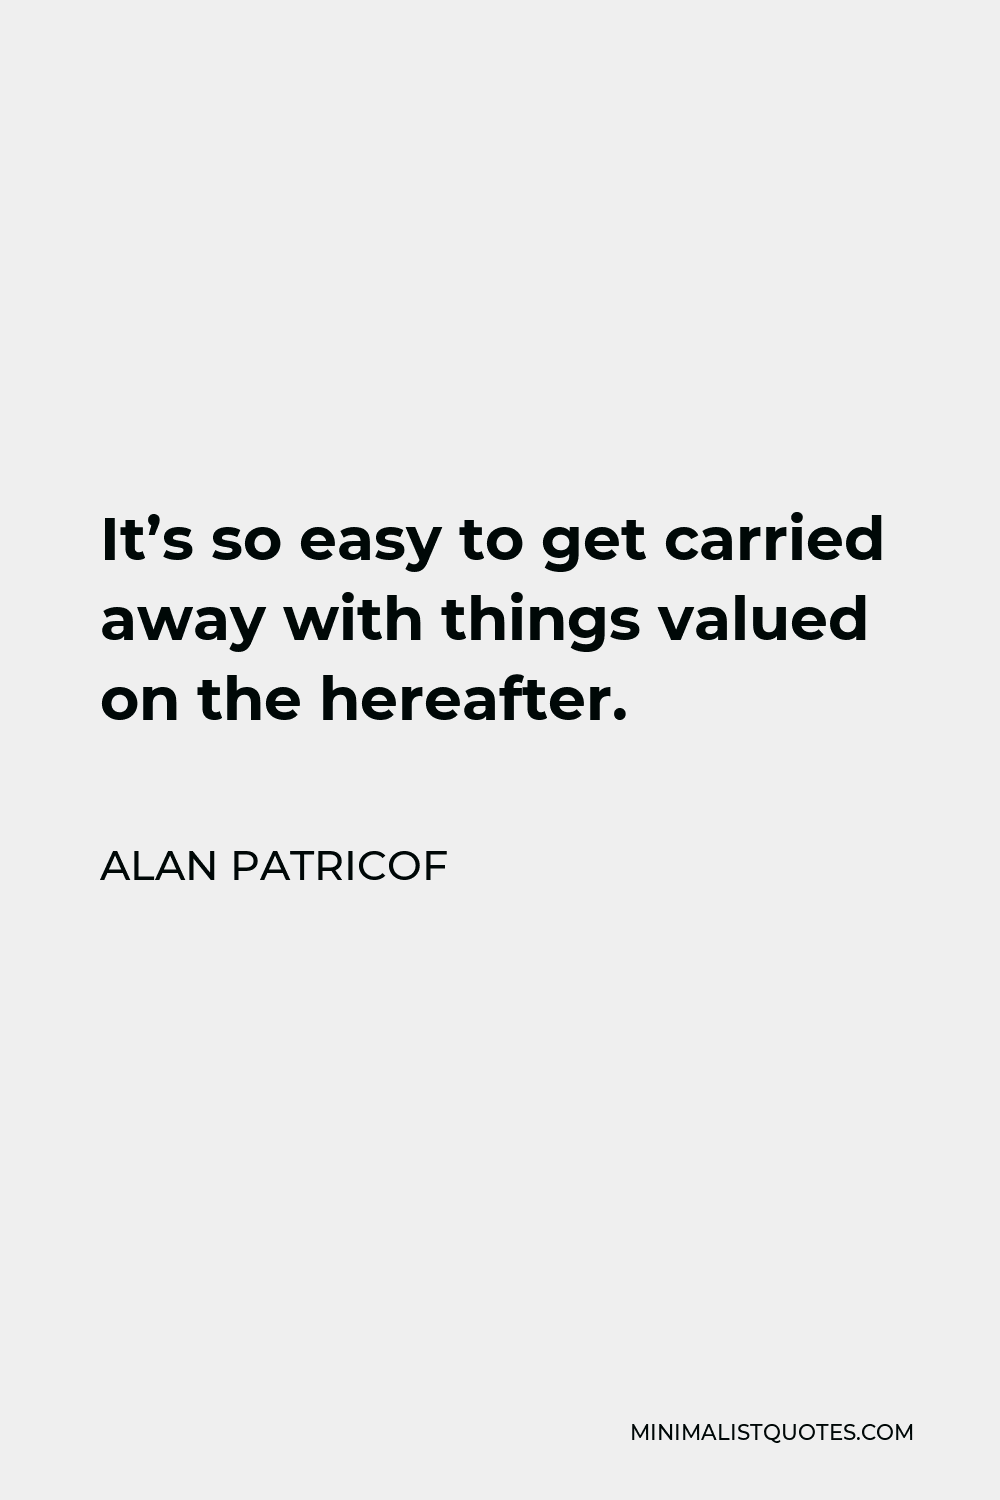 Alan Patricof Quote - It’s so easy to get carried away with things valued on the hereafter.